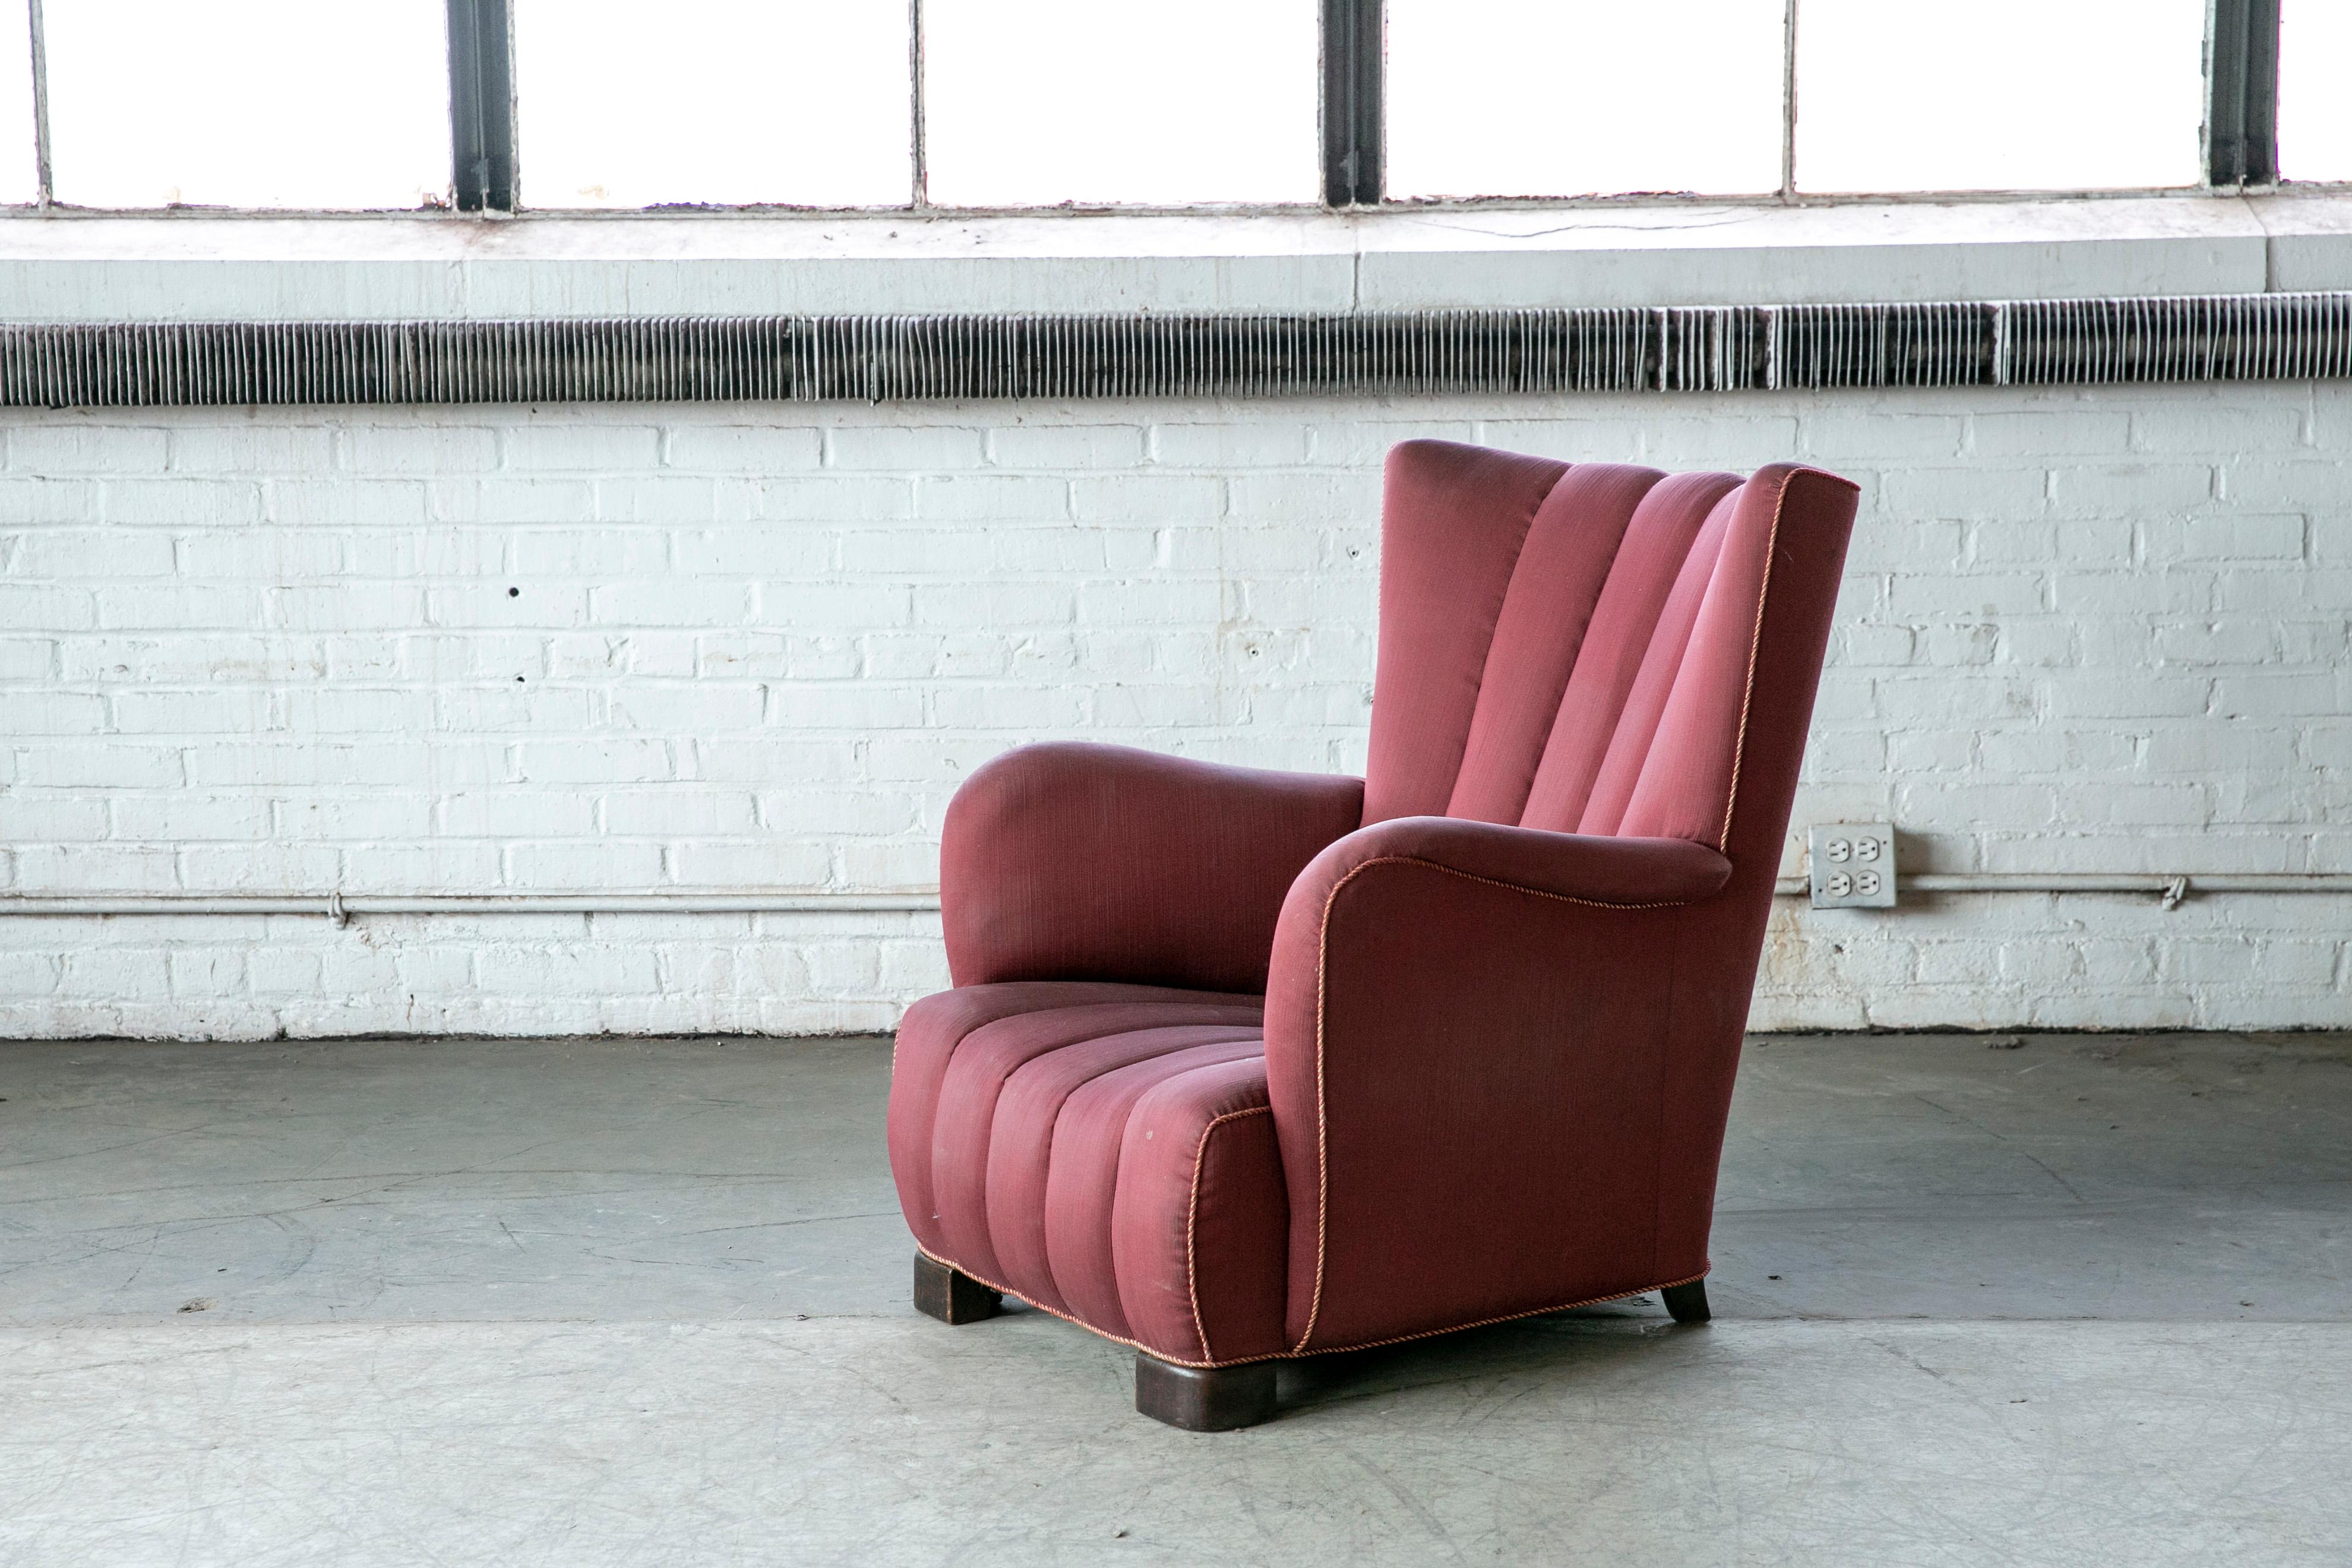 Unique highback lounge chair with channeled back and seat made in Denmark in the late 1930s or early 1940s. Unual to see channels both in the back and the seat. Very much in the style of Fritz Hansen and his model 1672. Solid and sturdy with coil